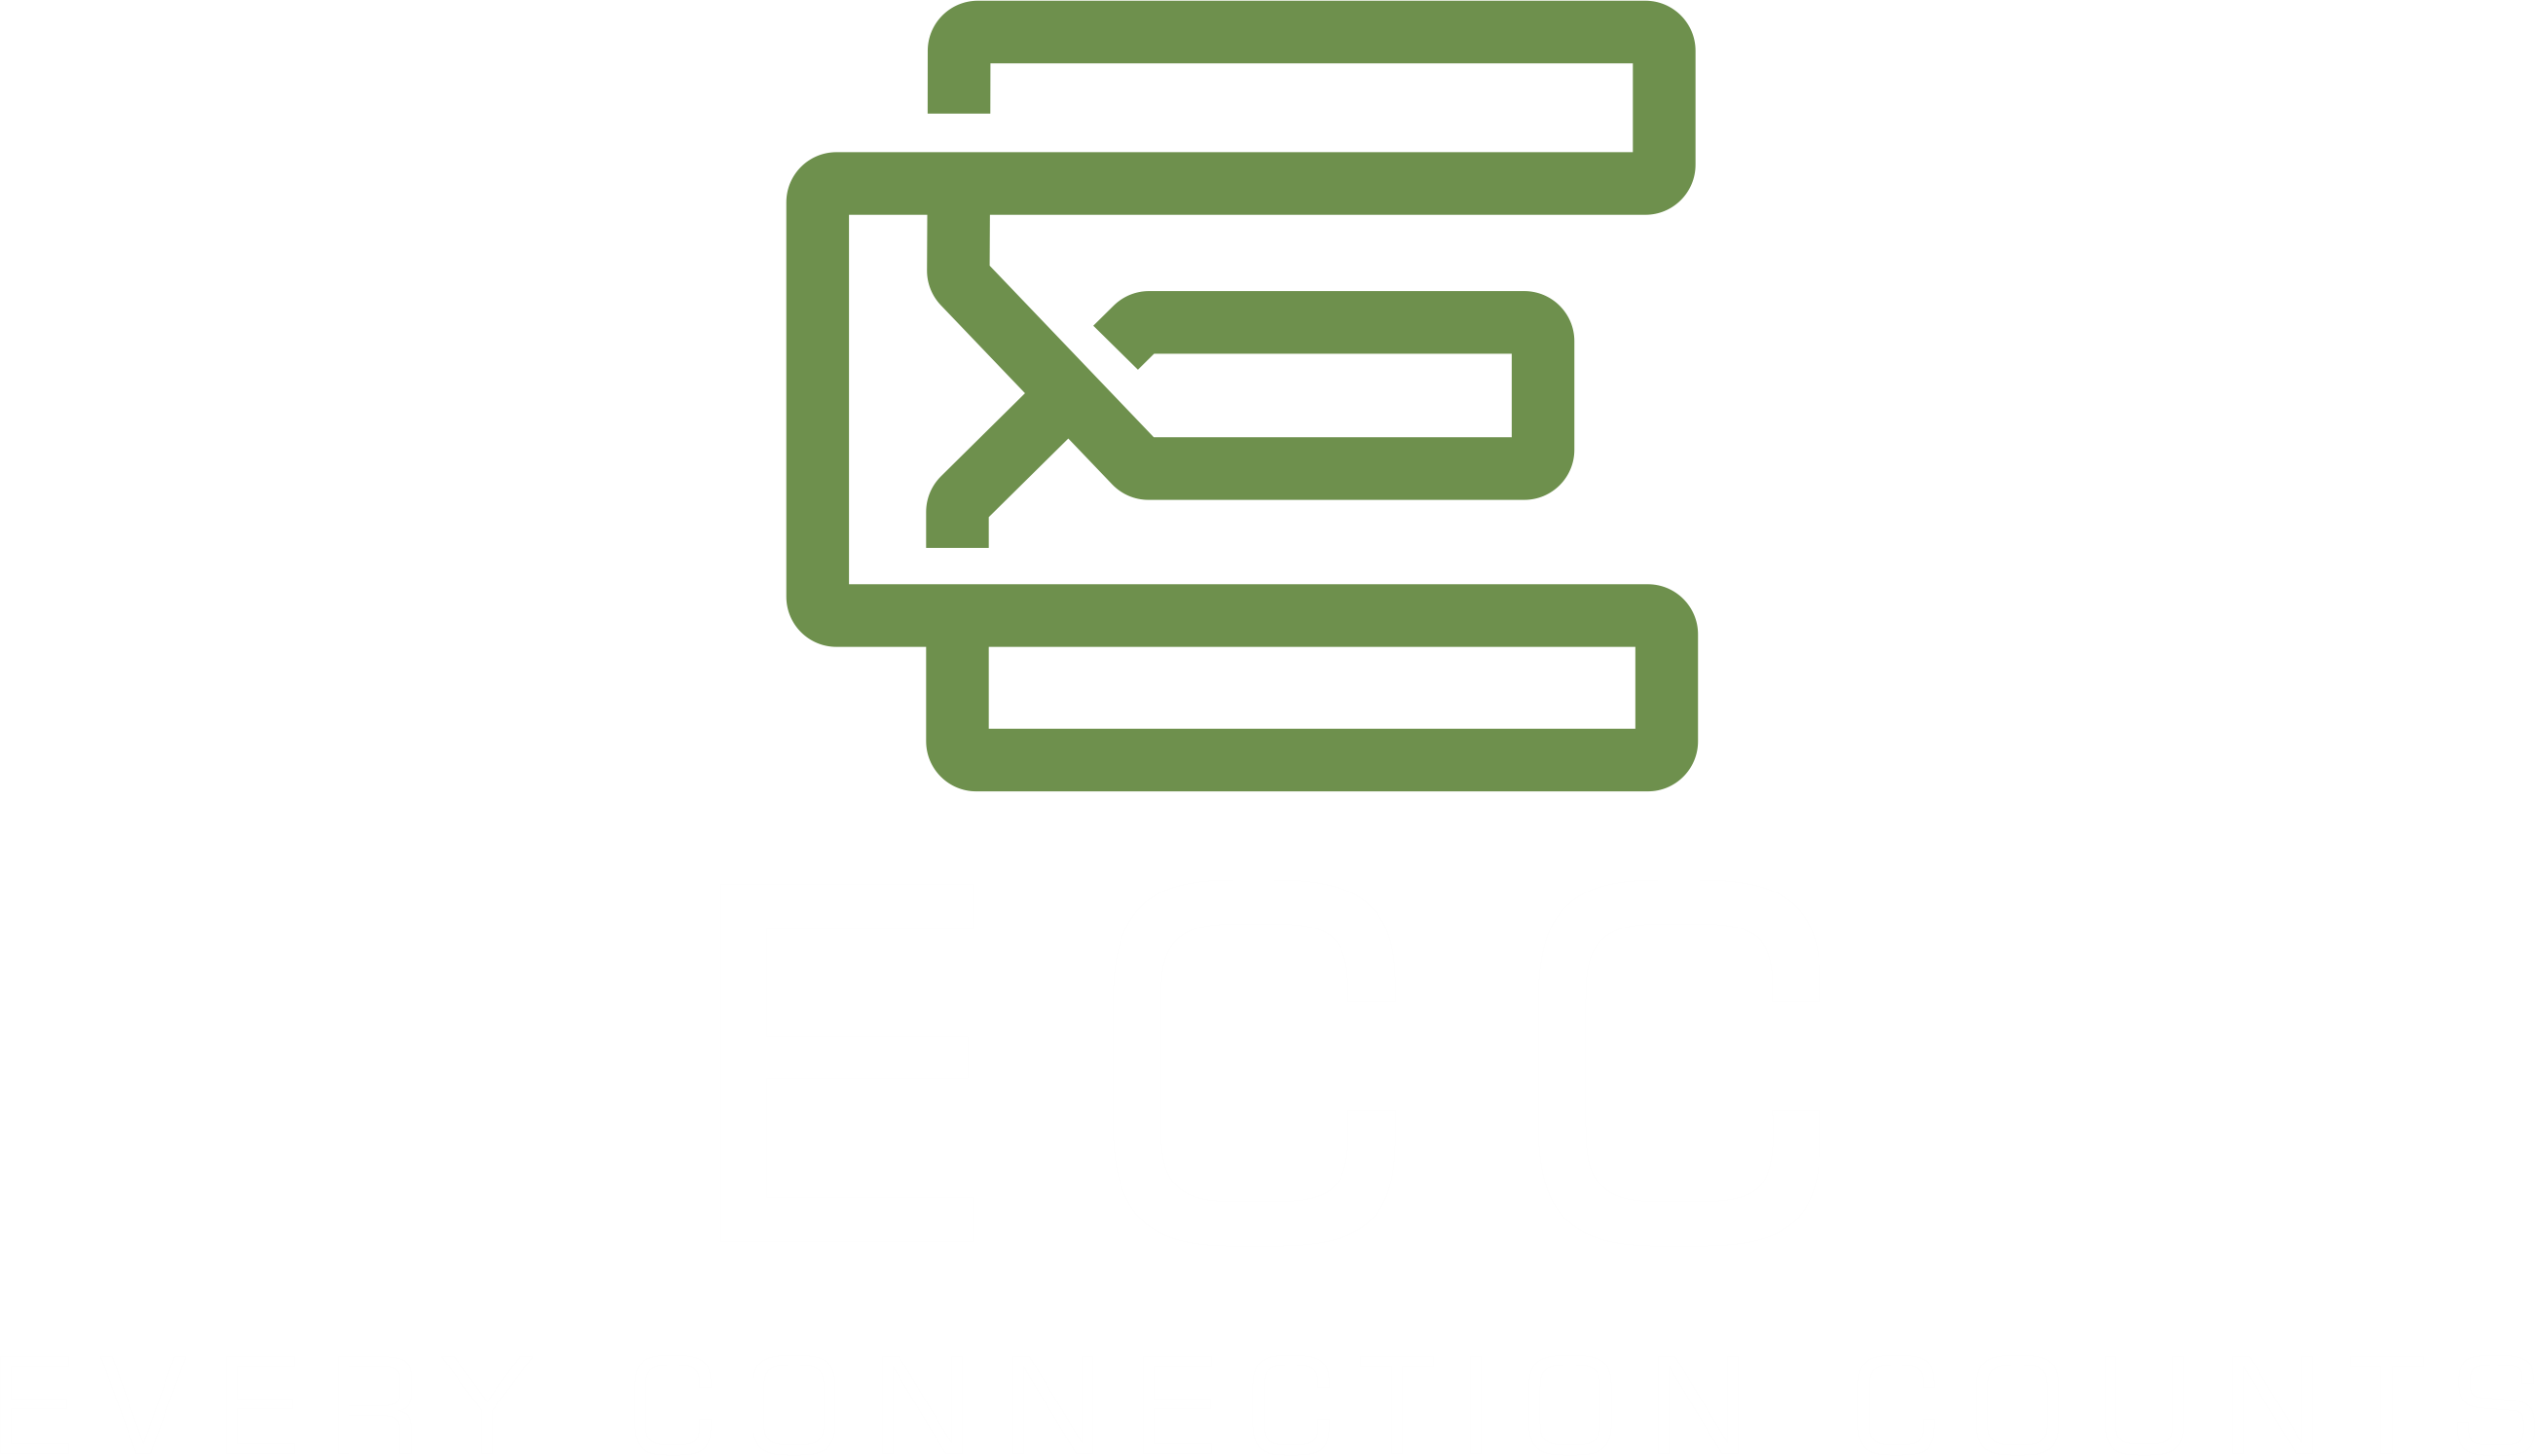 EVERY CONNECTION COUNTS